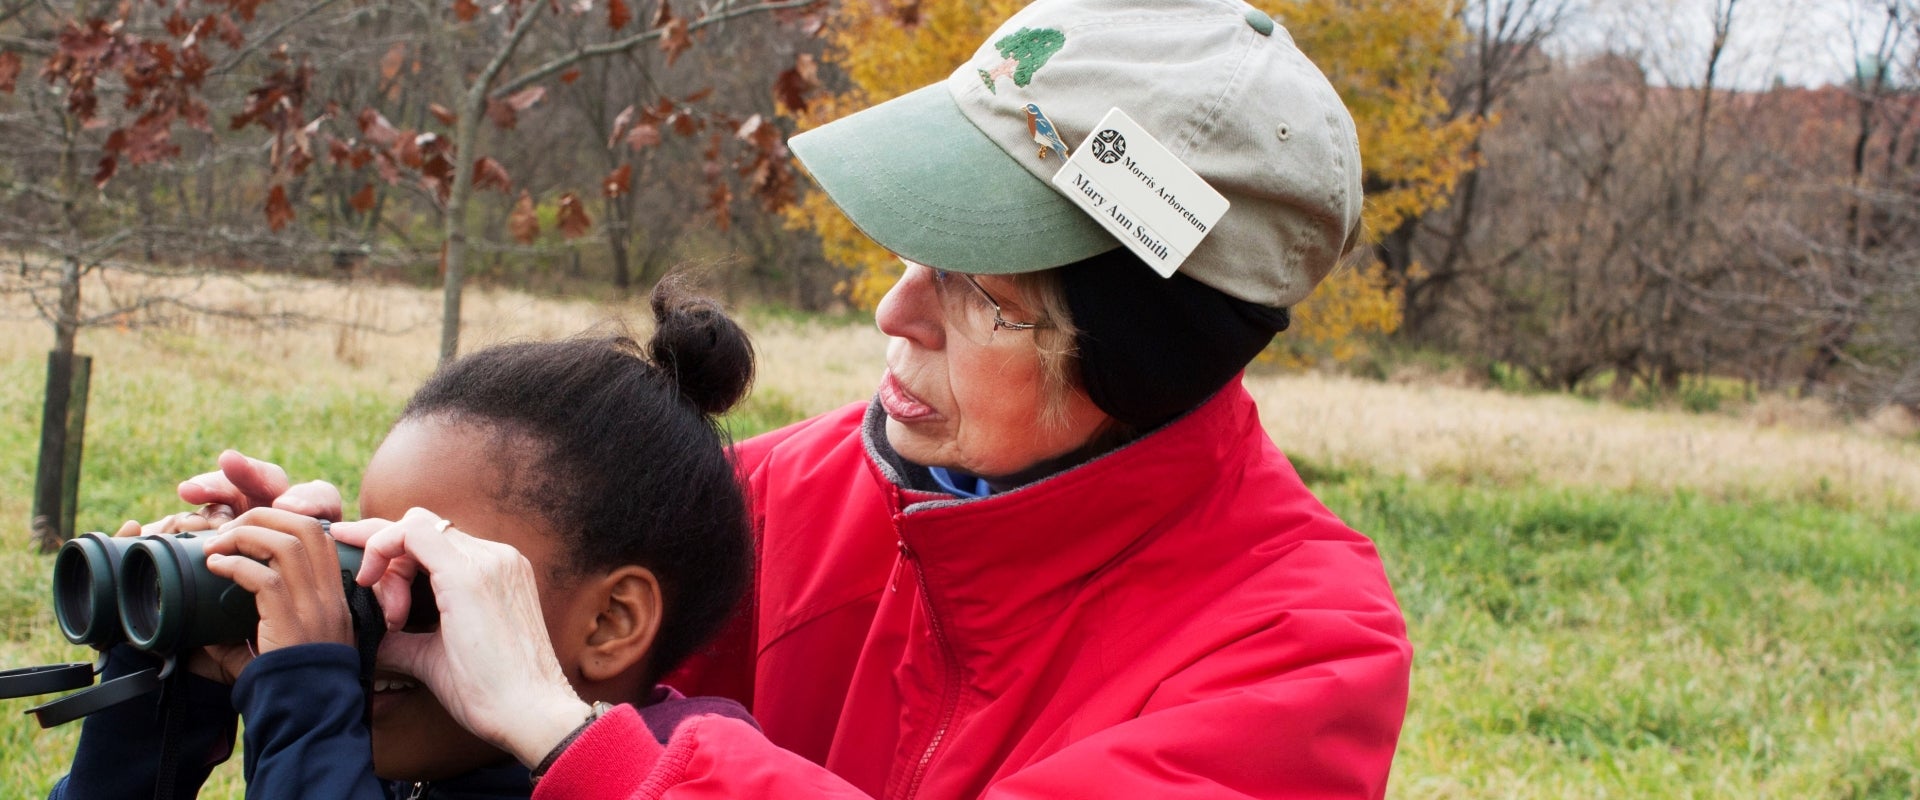 An garden volunteer shows a young girl how to use binoculars outdoors.